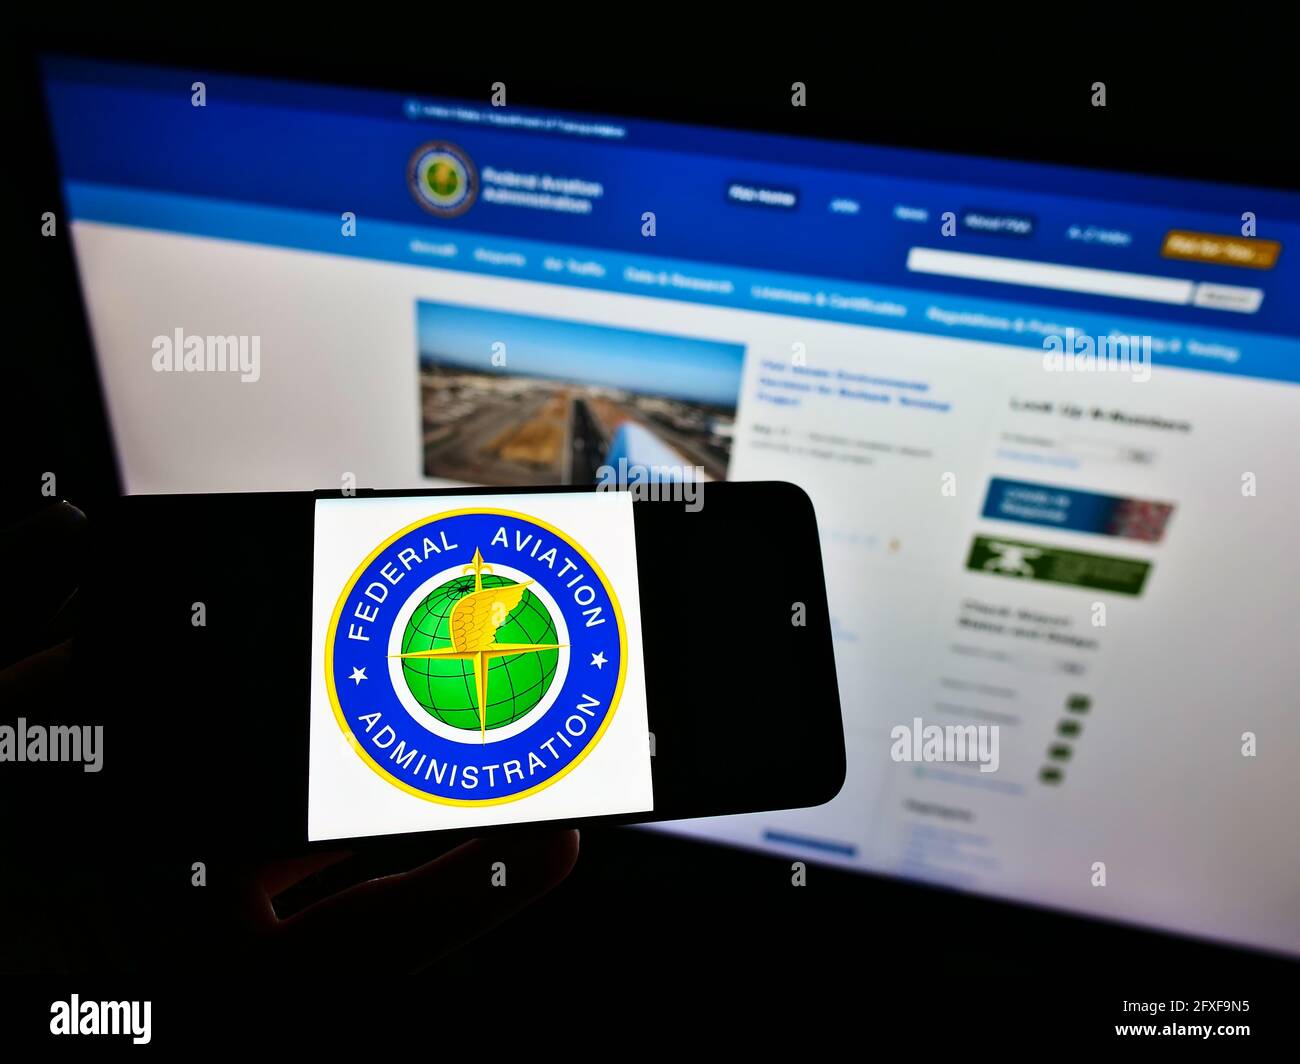 Person holding mobile phone with seal of American agency Federal Aviation Administration (FAA) on screen in front of webpage. Focus on phone display. Stock Photo